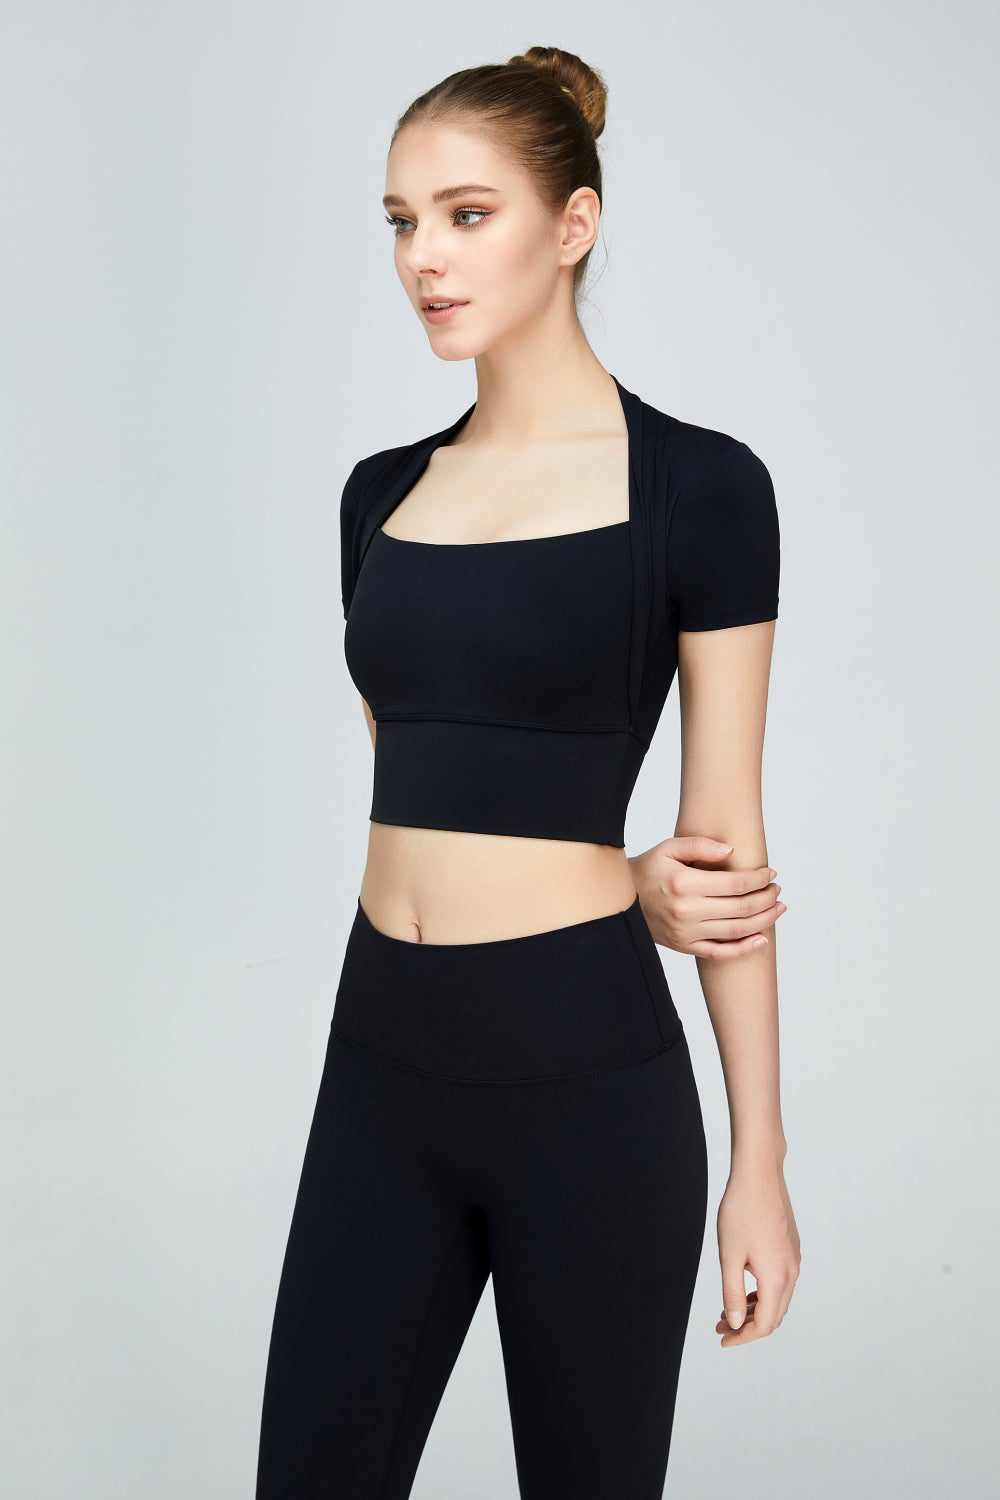 Women’s Short Sleeve Cropped Sports Top